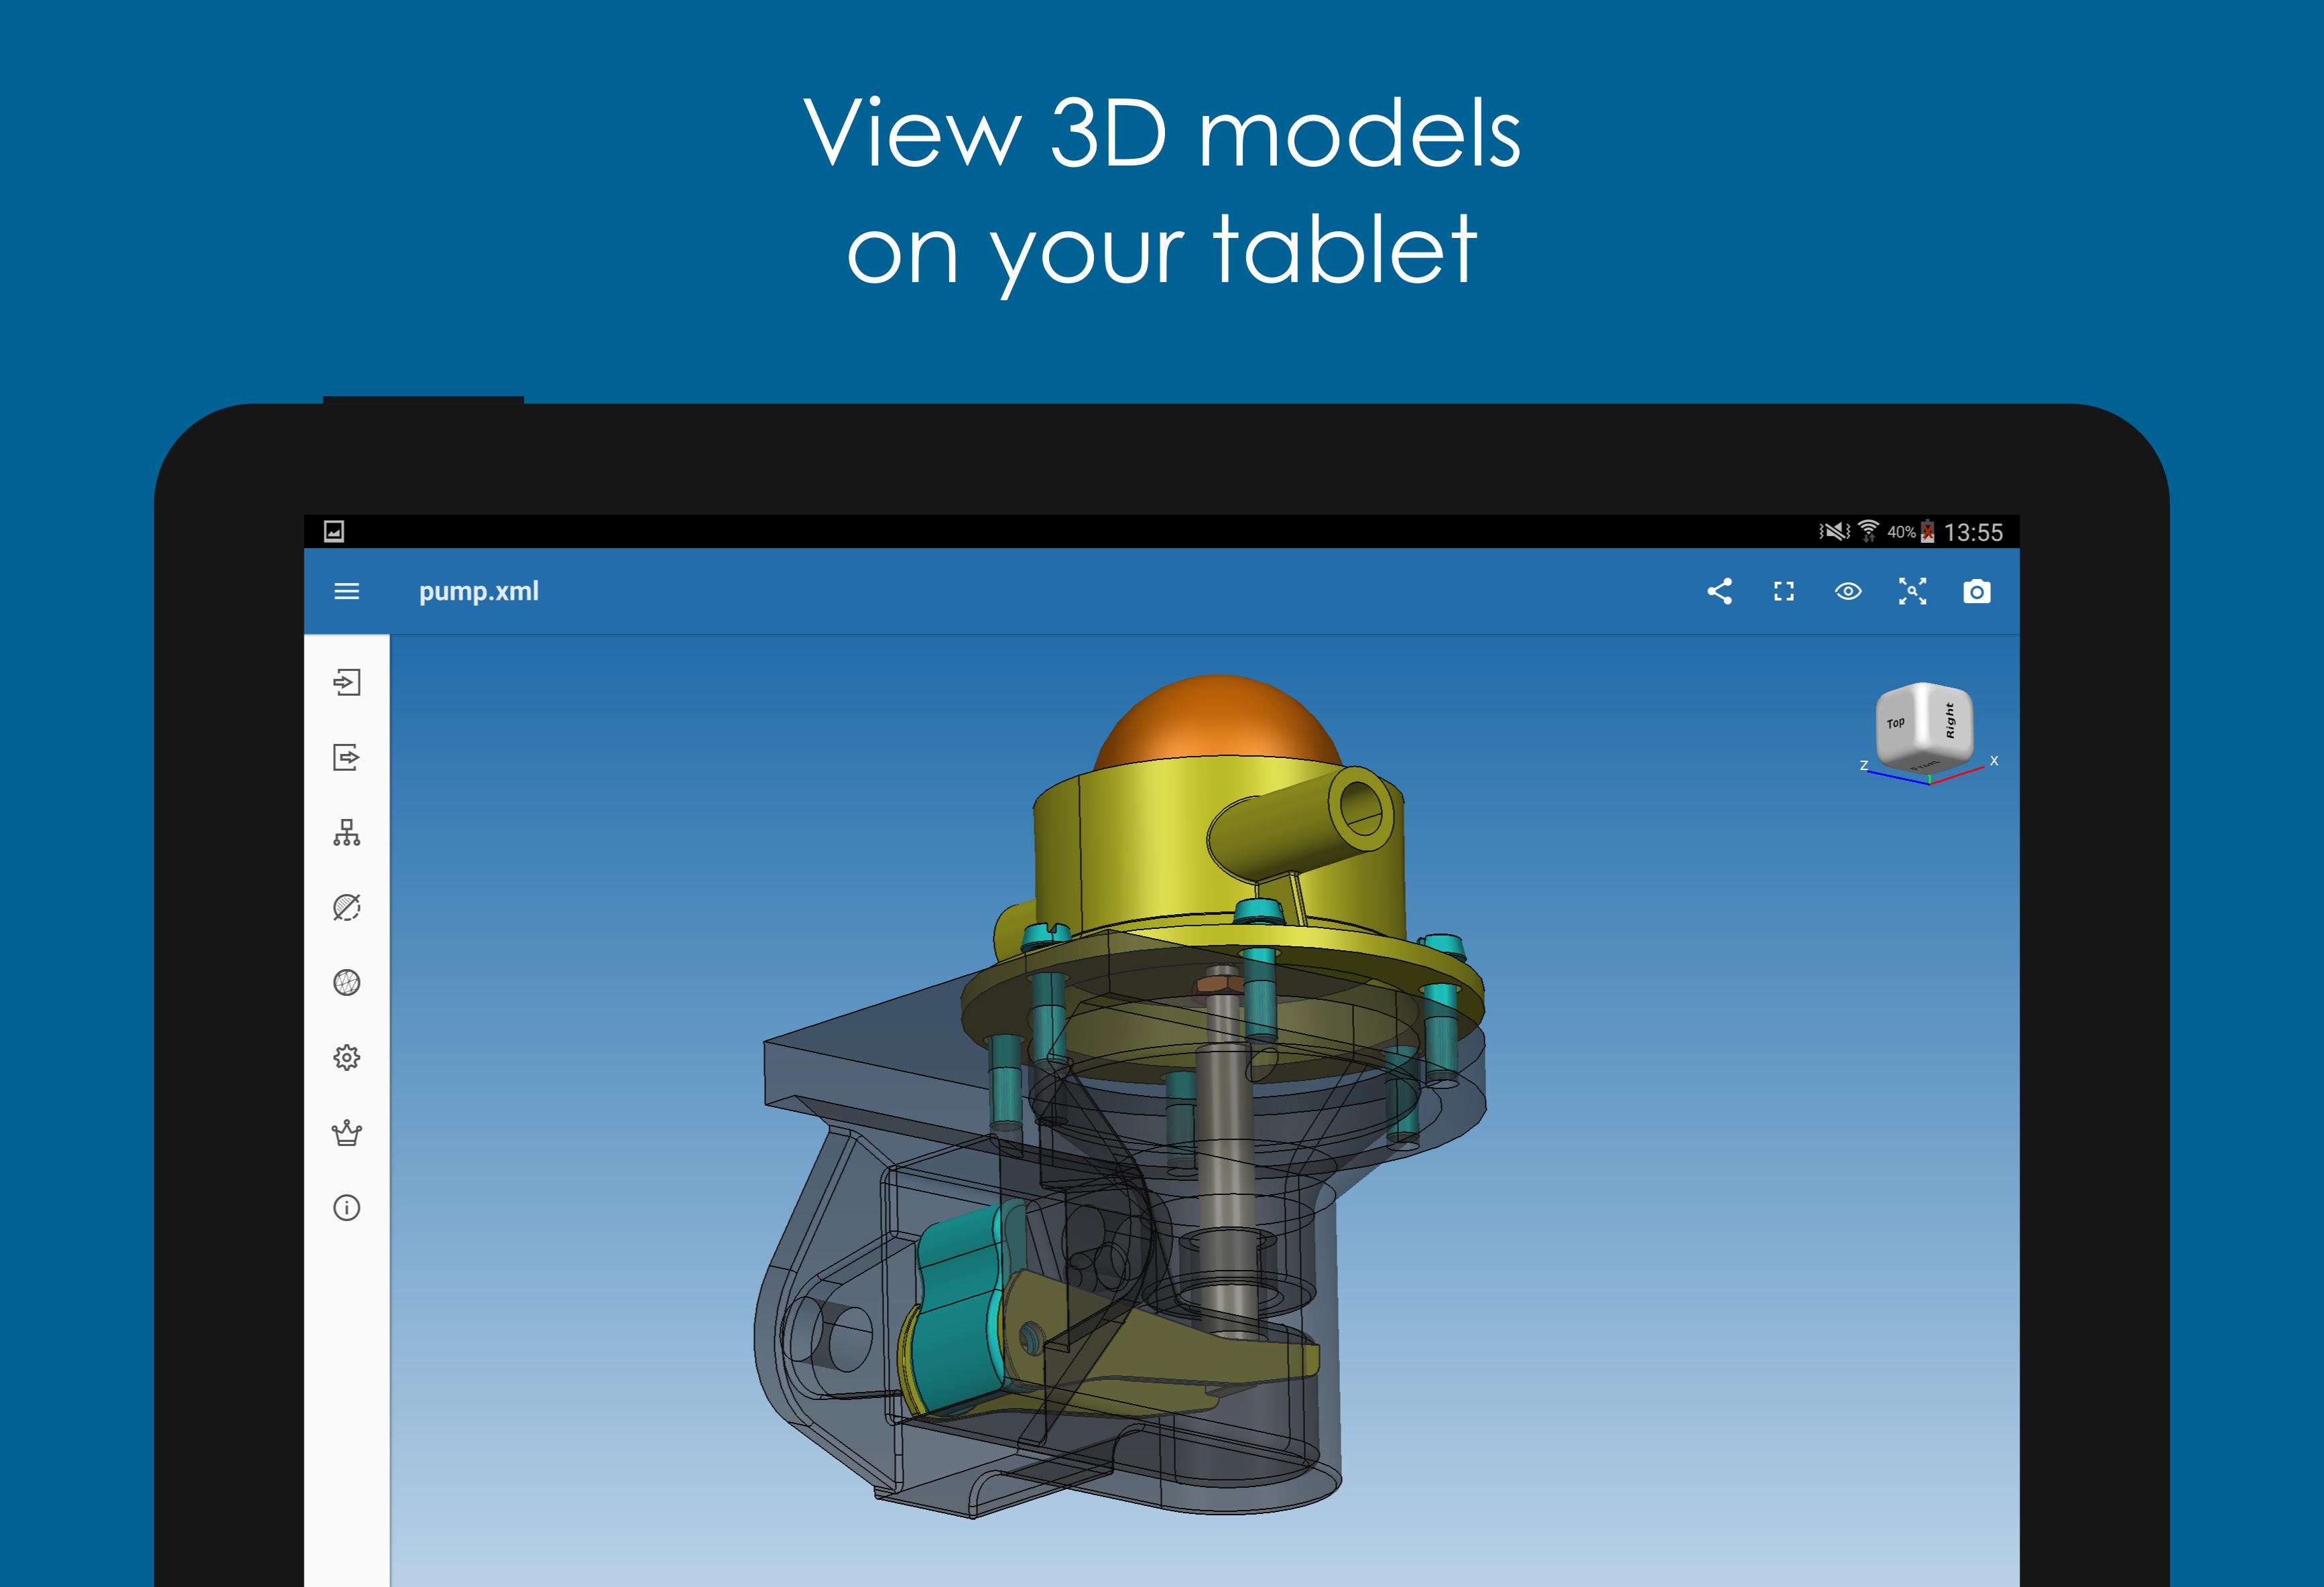 CAD Exchanger. Dwg fast viewer. CAD Exchanger "3.11.0". Edrawings viewer Android. True viewer